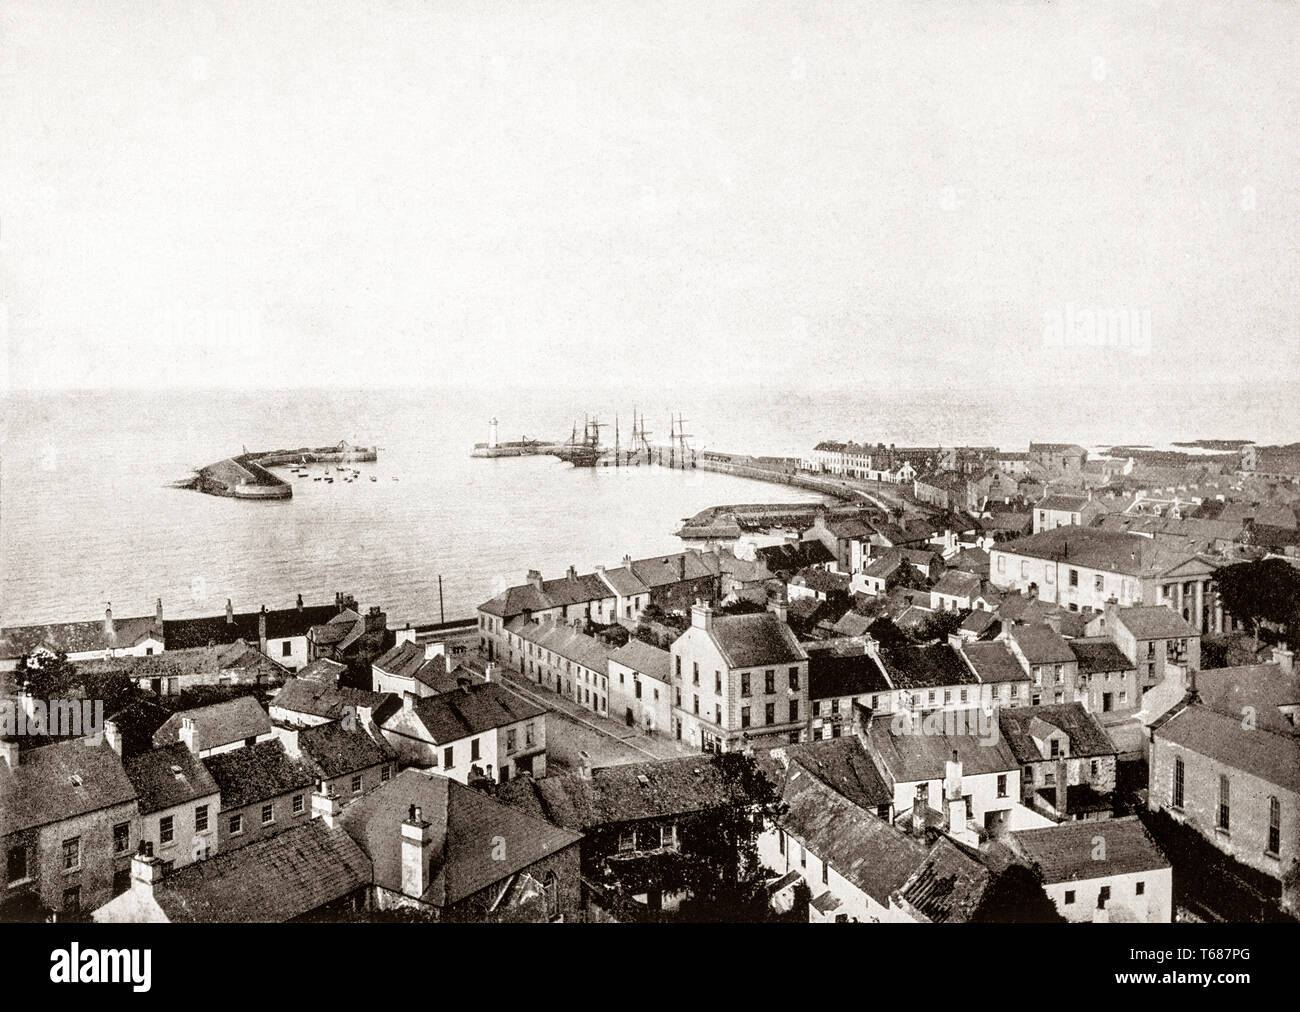 Late 19th Century views of Donaghadee in County Down, Northern Ireland is probably best known for its harbour, for centuries, it has been a haven for ships from at least the 17th century.  The new harbour was started in 1821 by John Rennie Senior, the celebrated engineer whose works included London Bridges over the Thames. Stock Photo